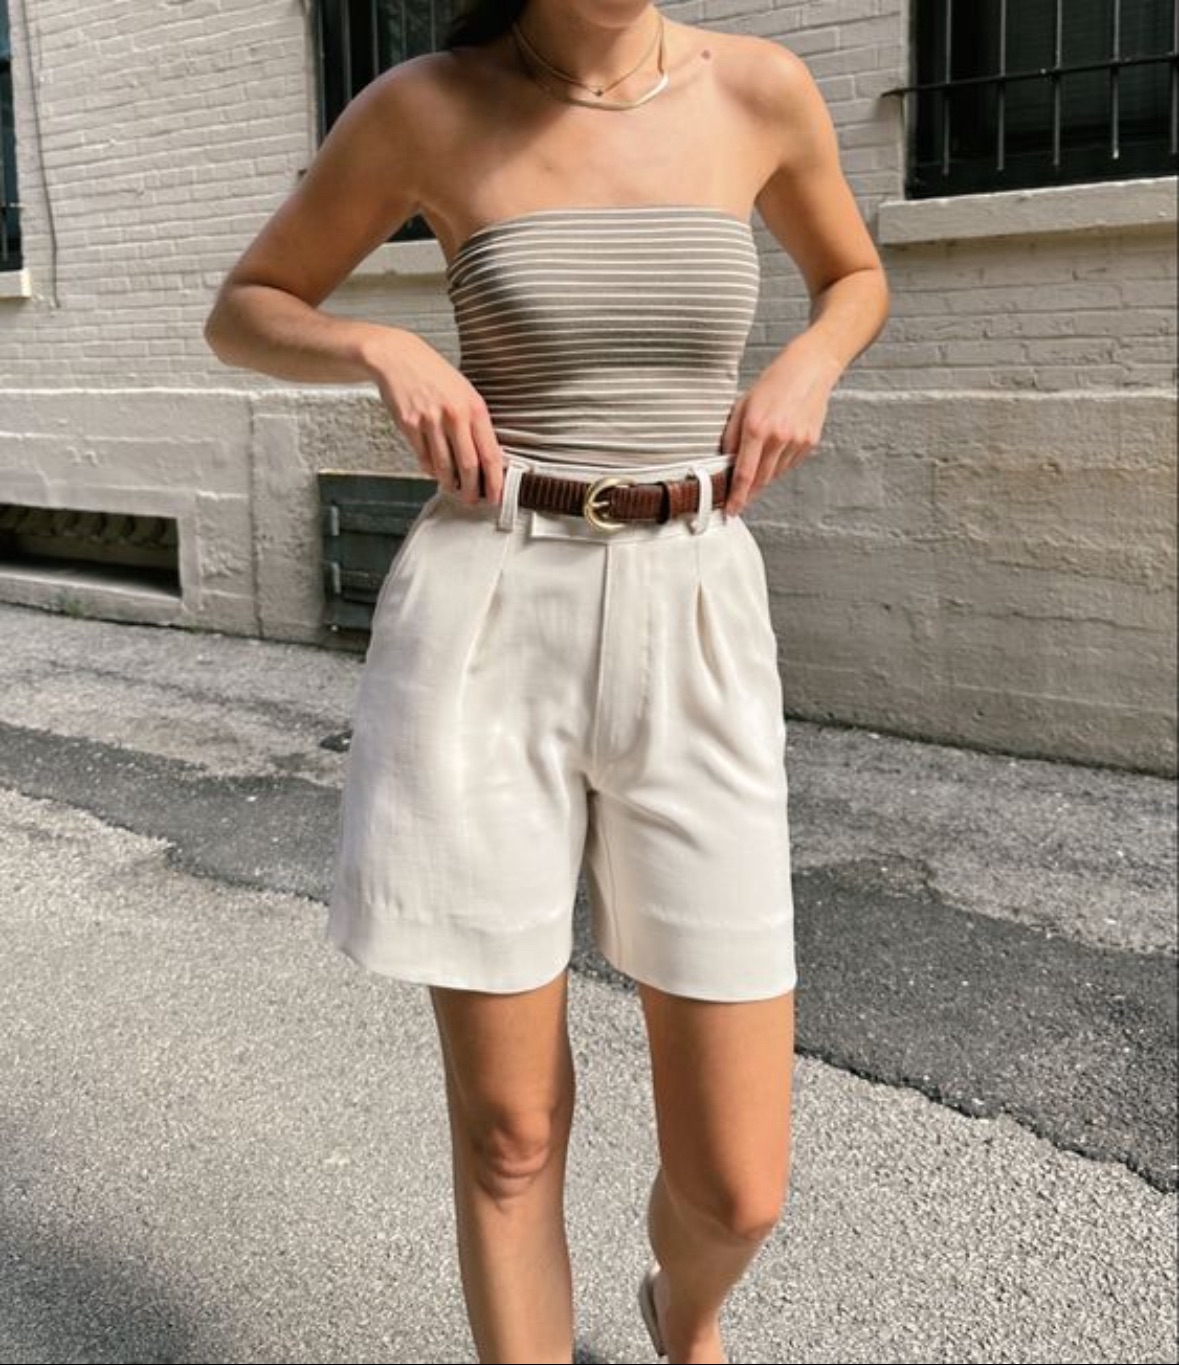 trouser shorts and tube top